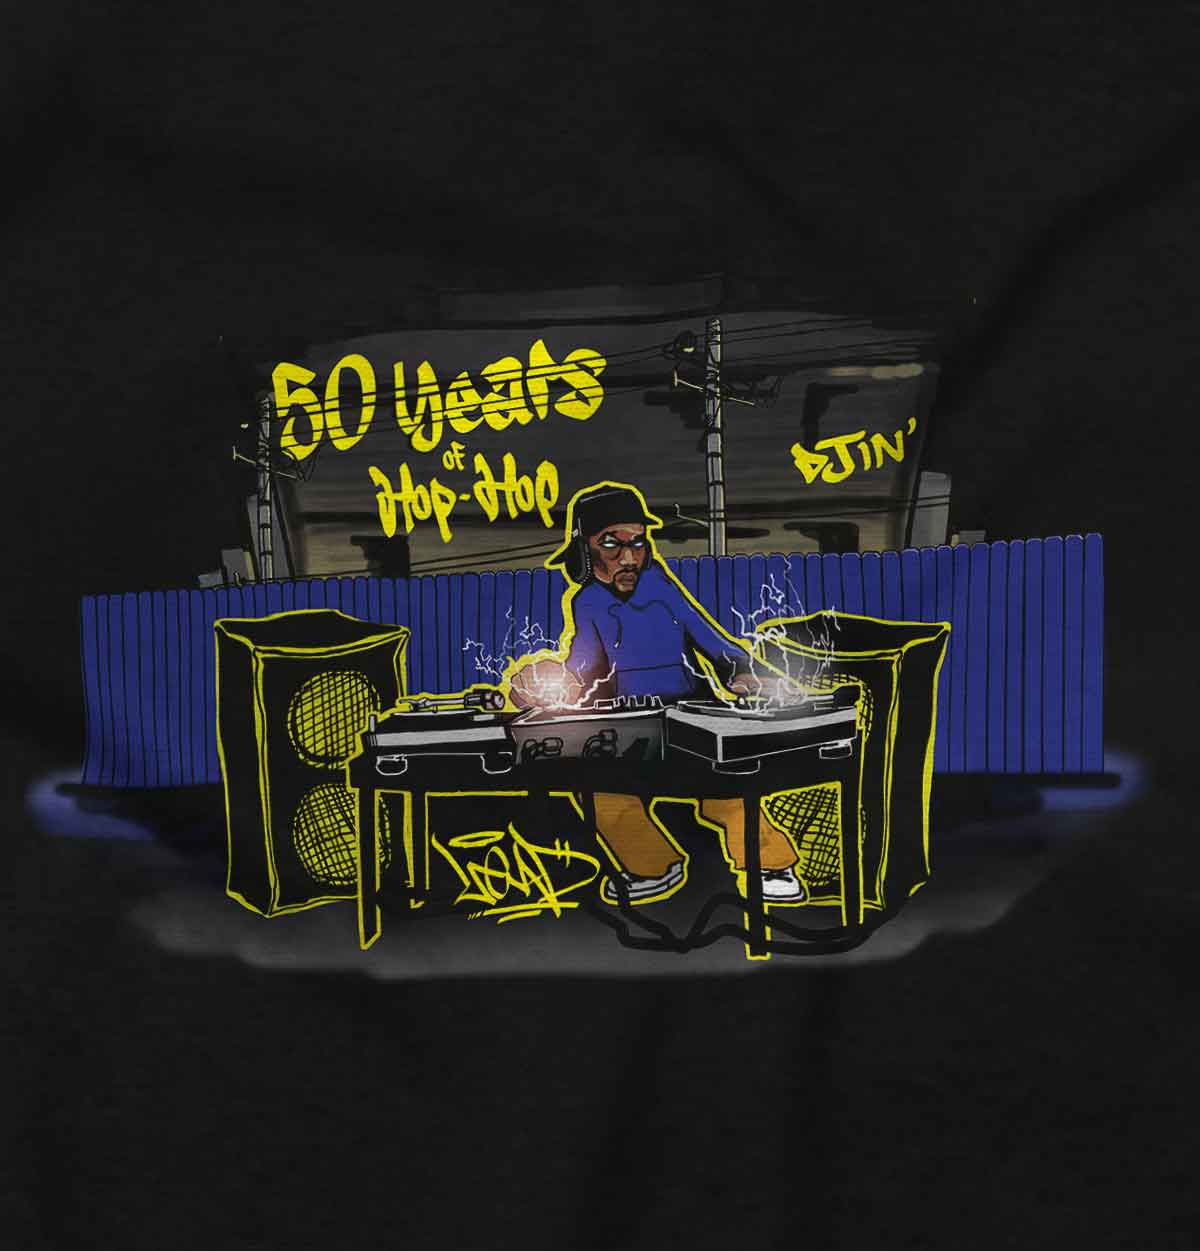 This shirt features a design inspired by urban art with a DJ mixing music and speakers playing. It's a celebration of 50 years of hip-hop and pays homage to its roots.